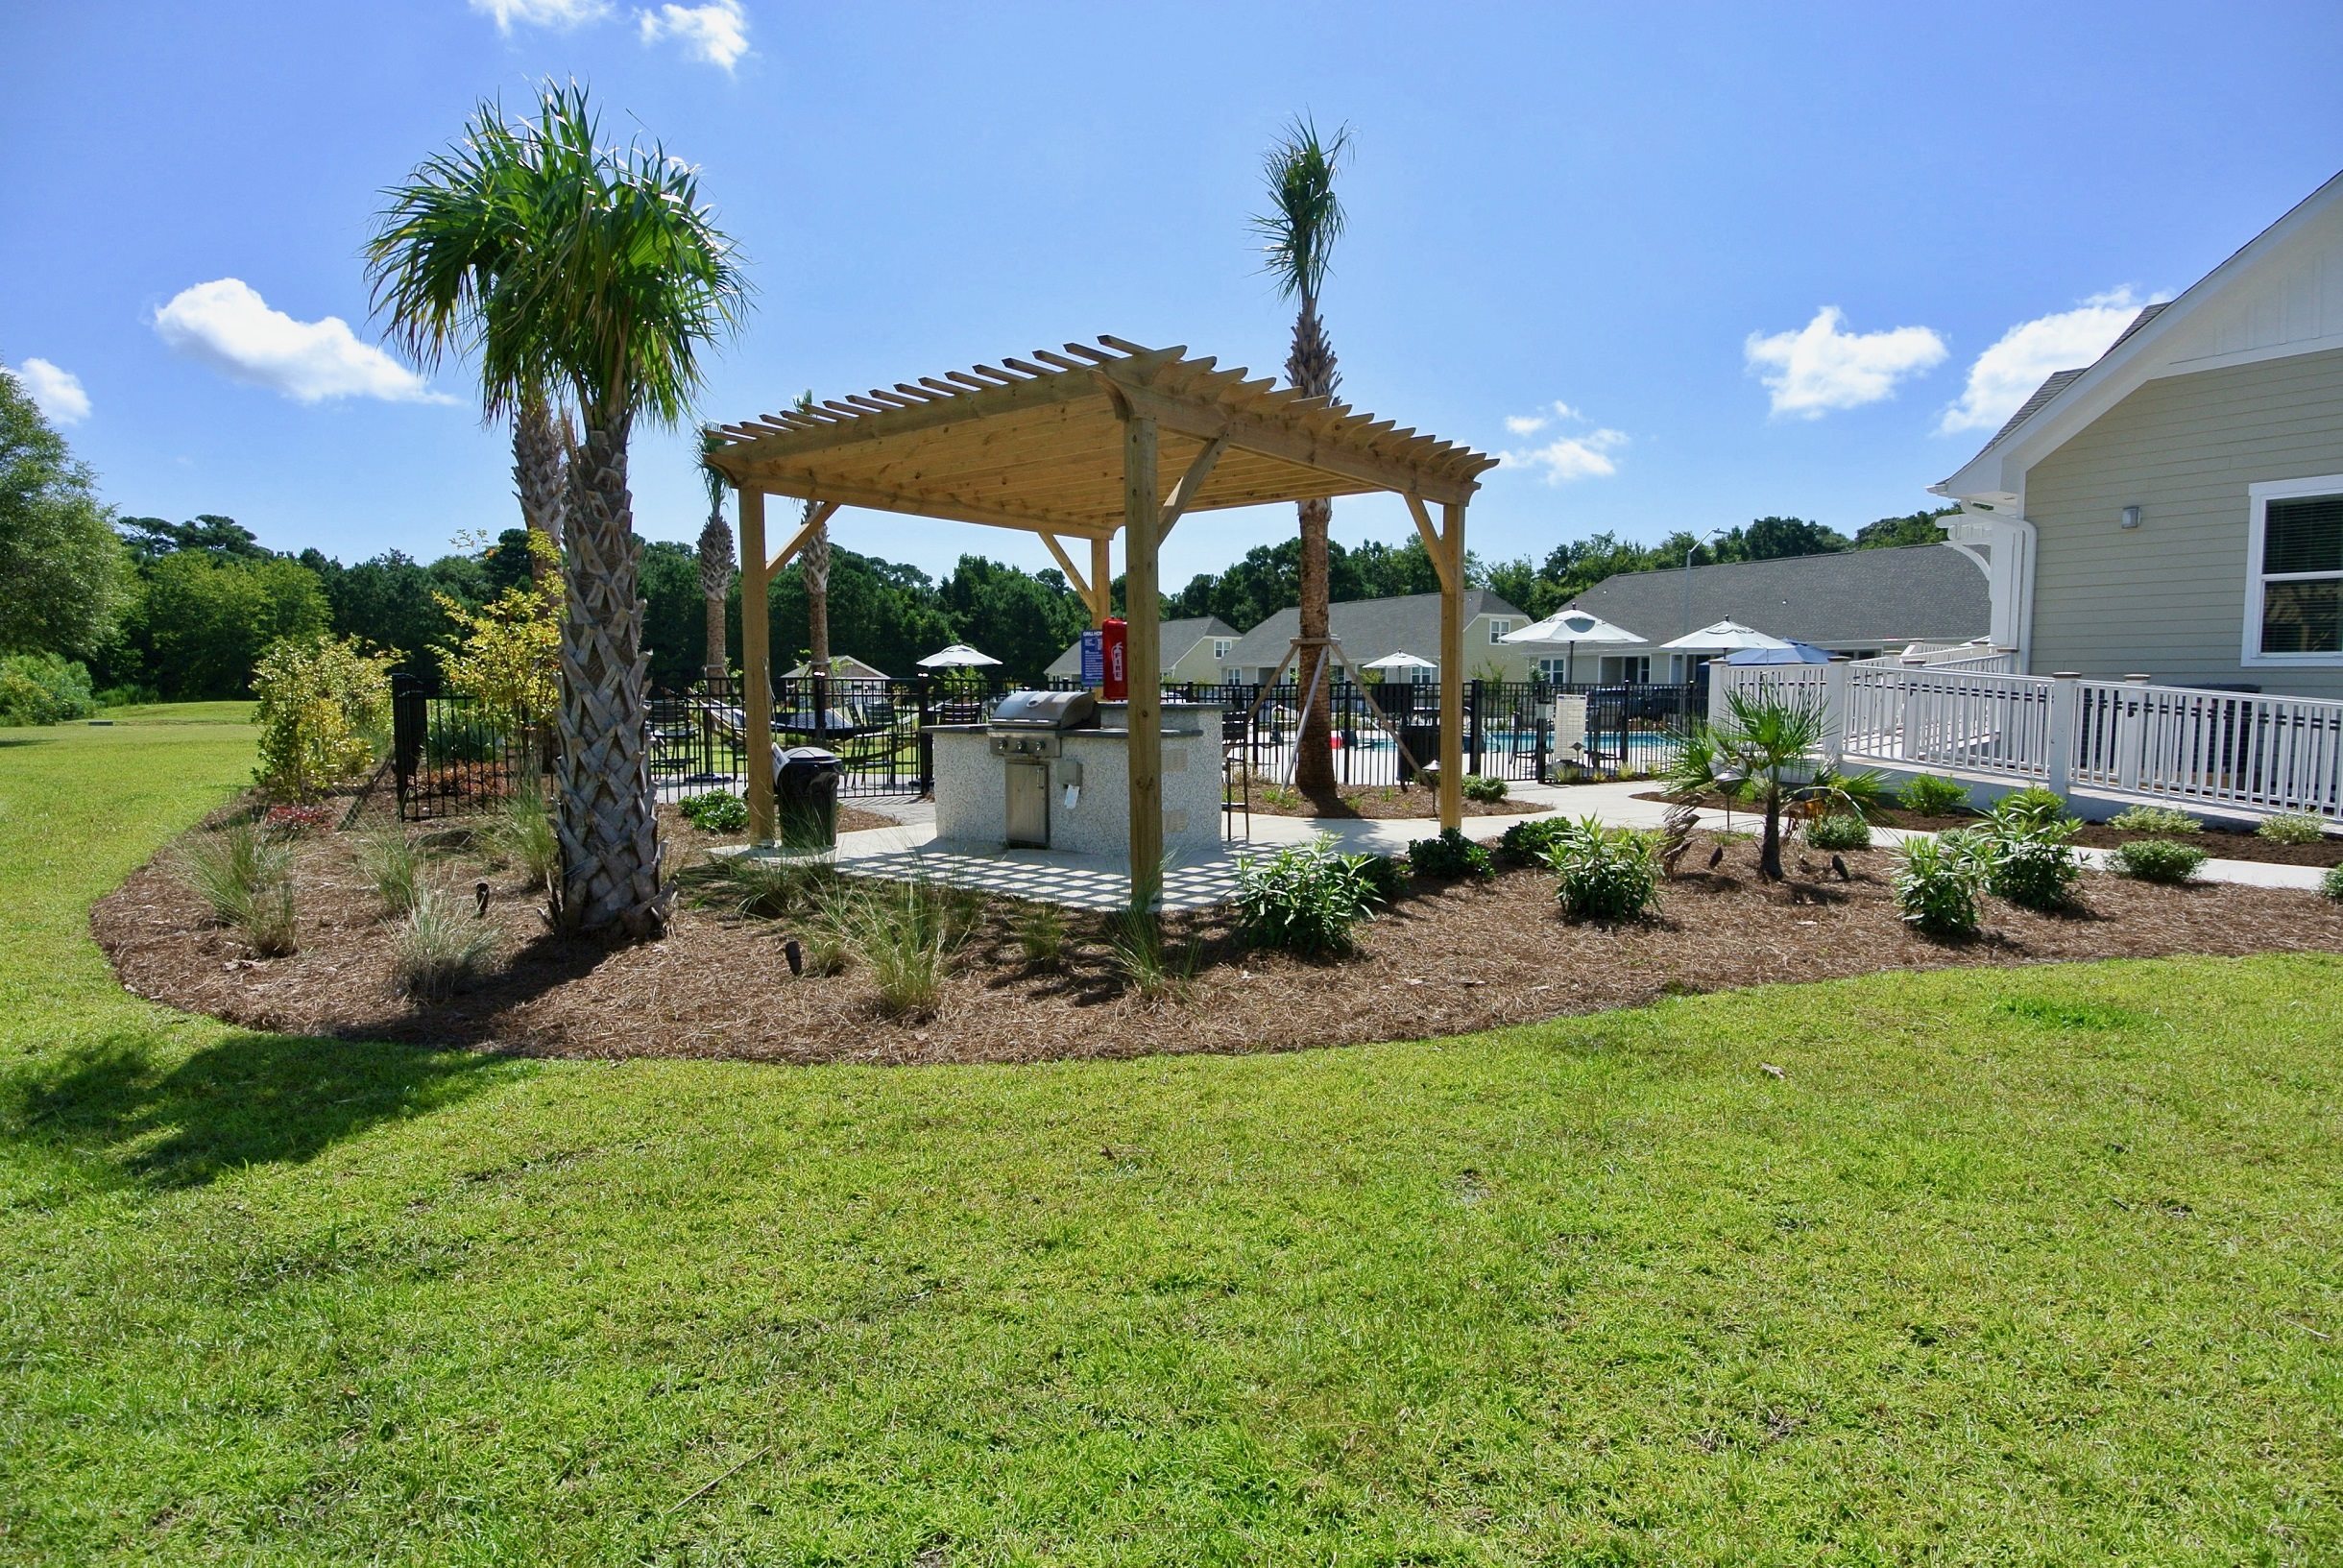 Luxury Townhomes in Wilmington, NC - Myrtle Landing Outdoor BBQ Grill Pavilion Surrounded by Lush Landscaping